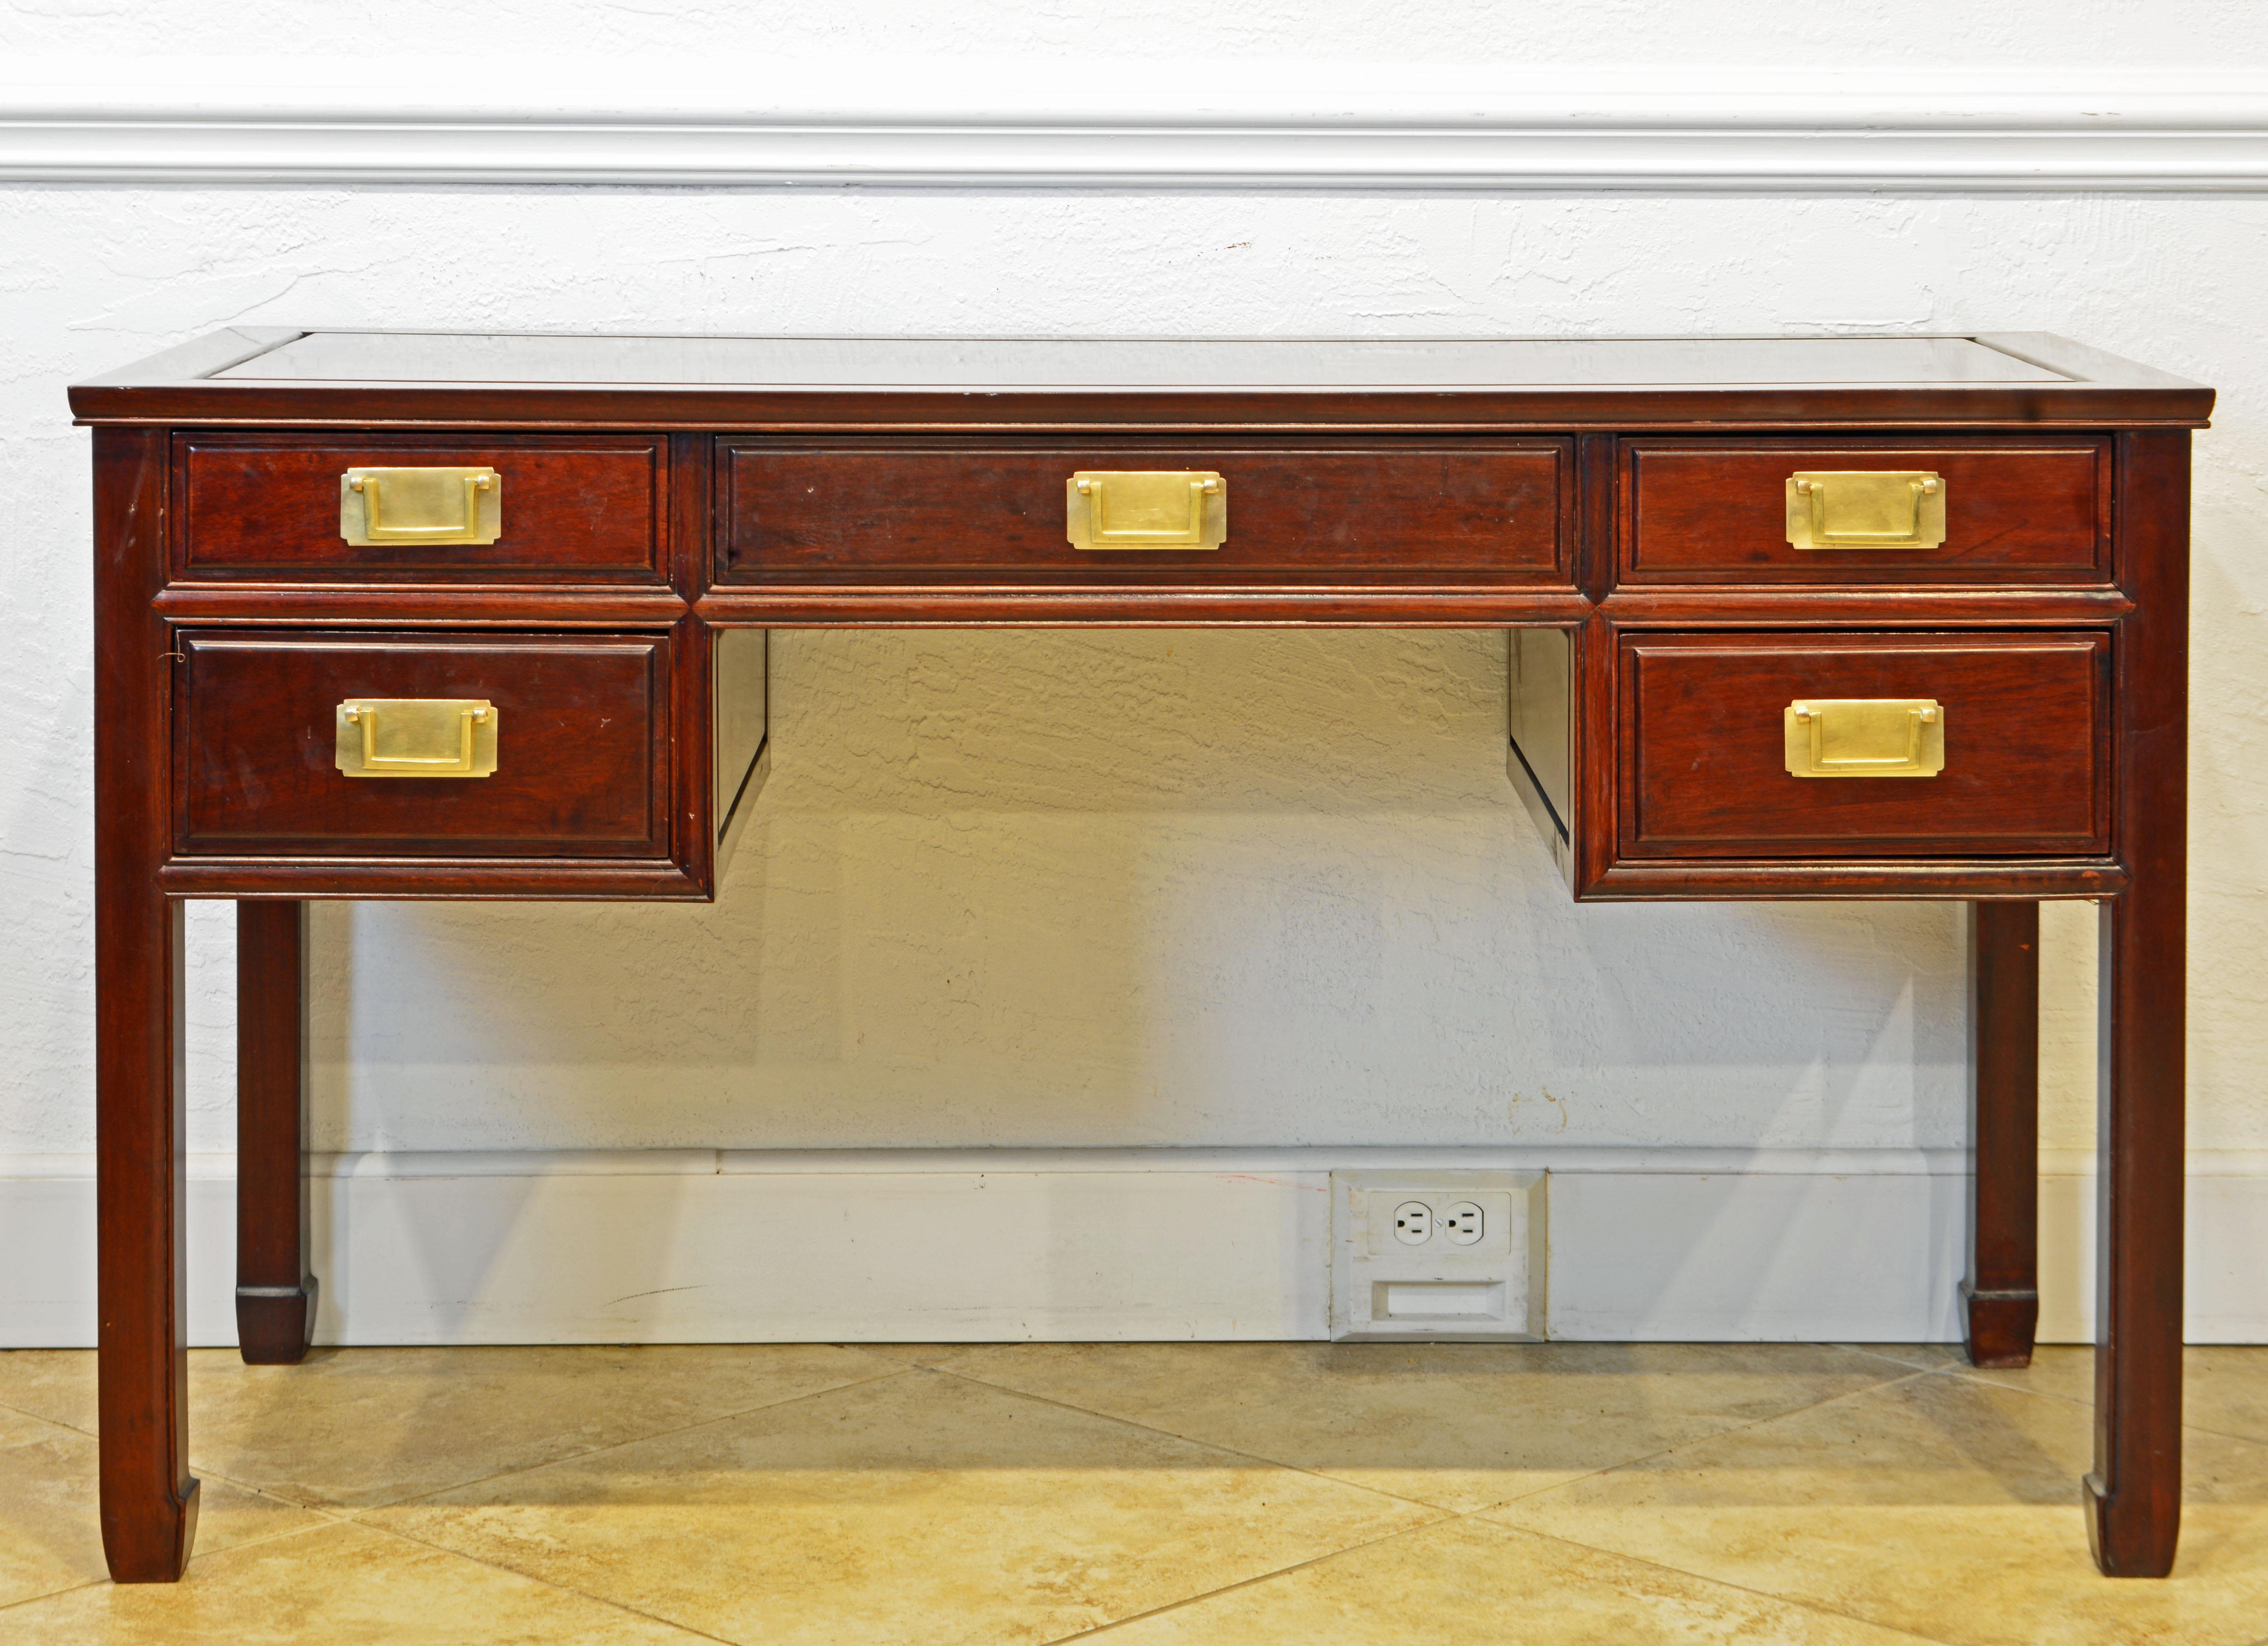 This British Colonial style writing desk is made with great craftsmanship of solid polished mahogany, even the five drawers. It is likely to originate in Hong Kong dating to circa 1970. All surfaces are made as framed panels, even the top, which